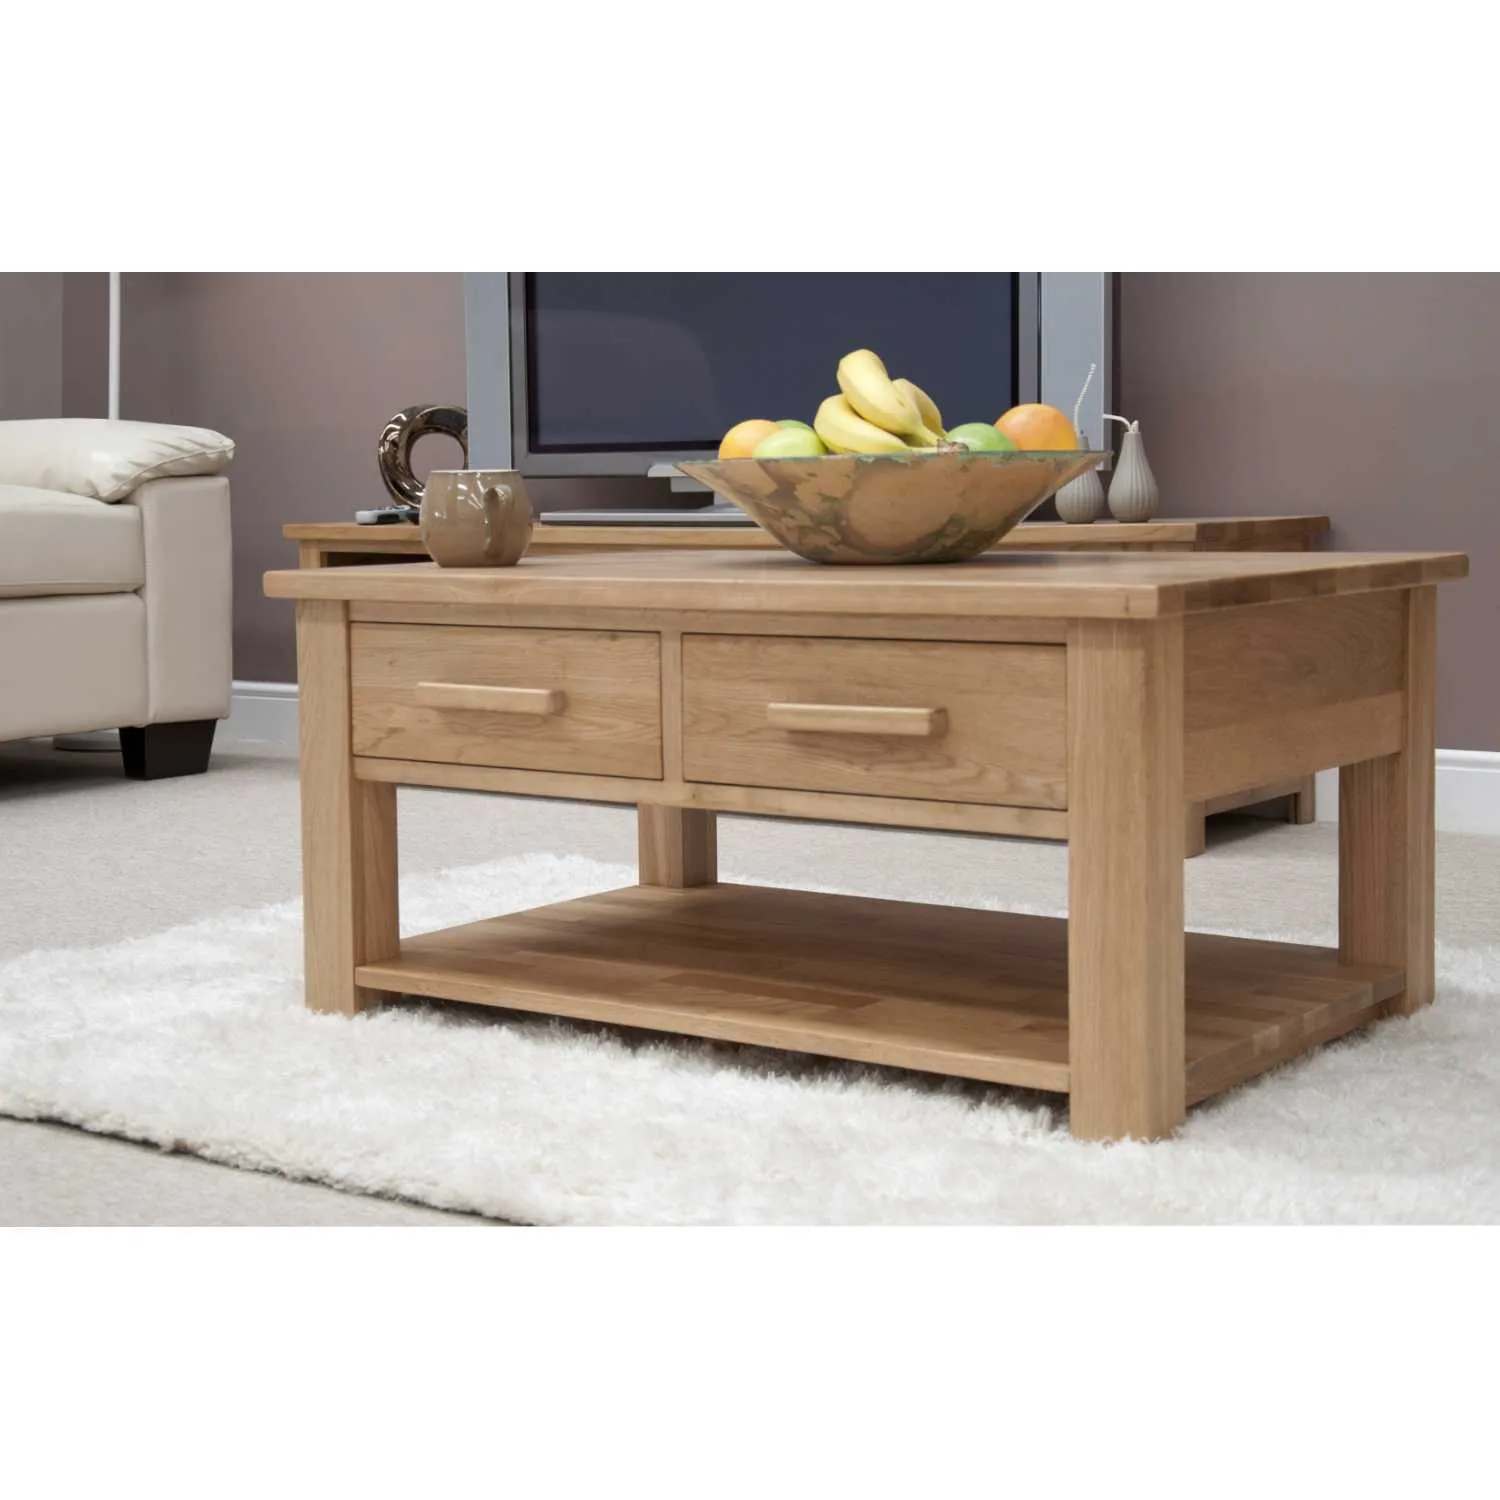 Opus 3 x 2 Coffee Table With Drawers